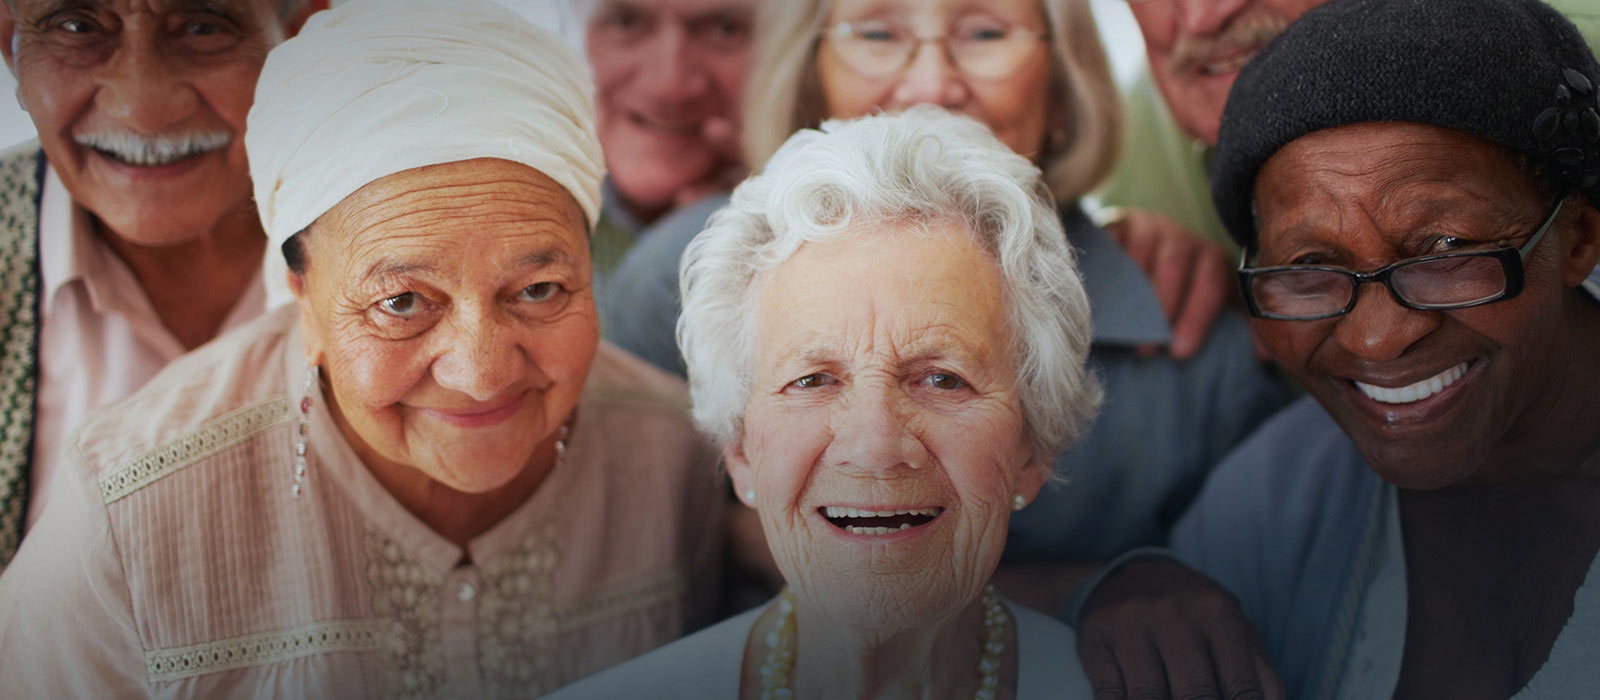 Image of a group of elderly people from various ethnicities